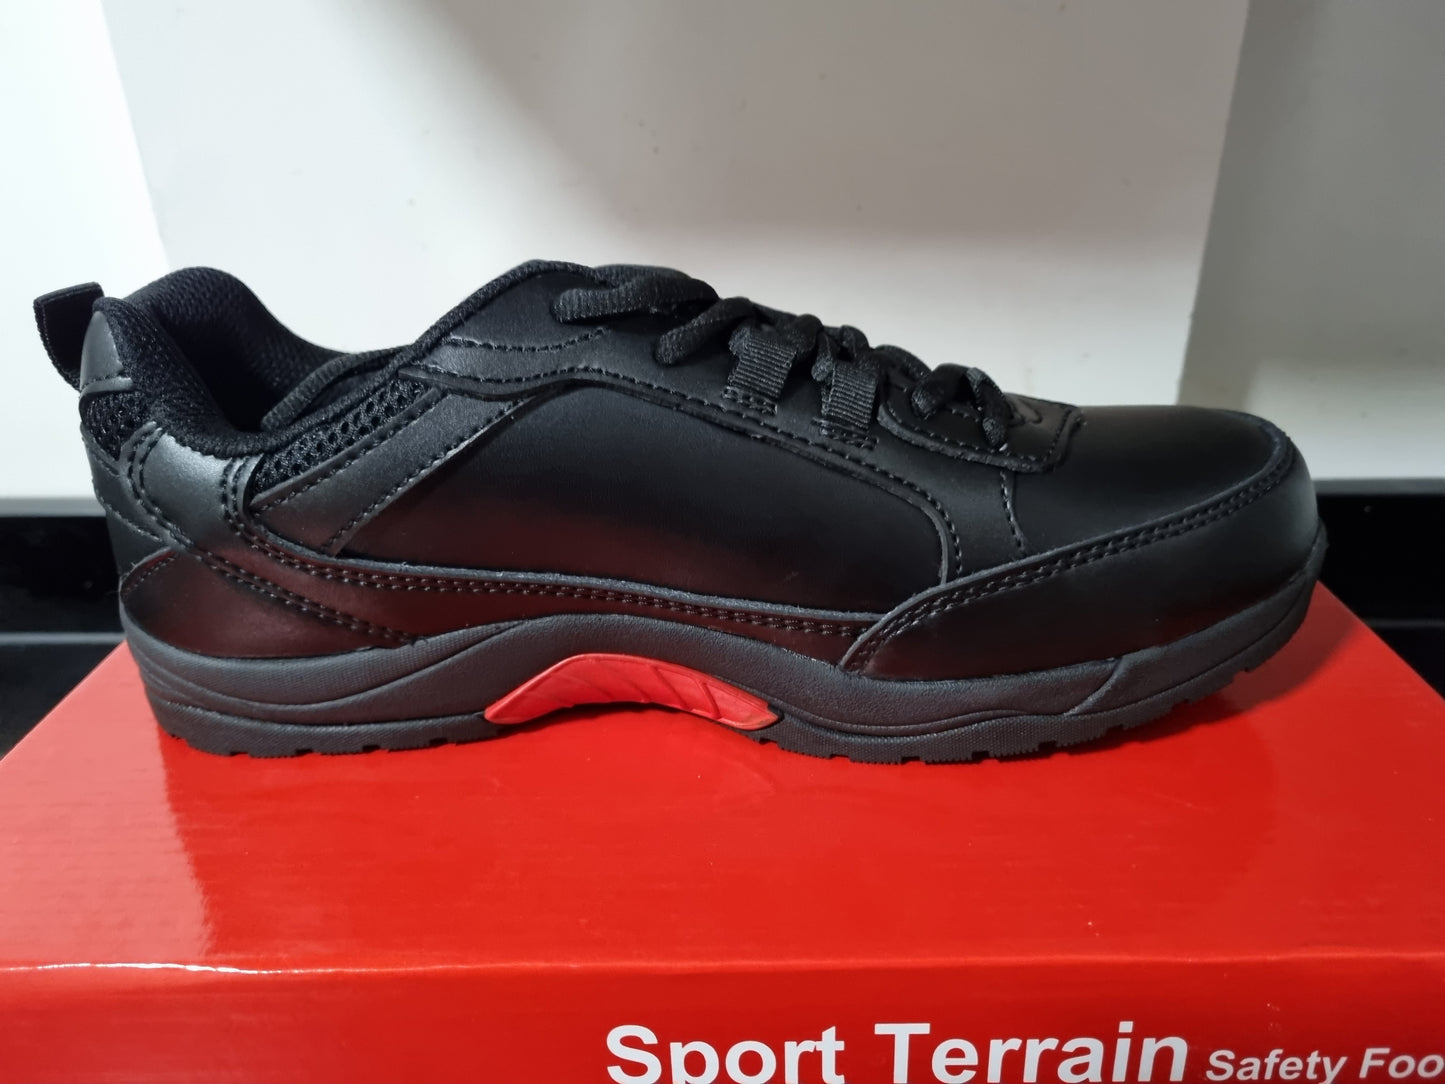 Safety Trainer By Sport Terrain - Steel Toe and Composite Midsole